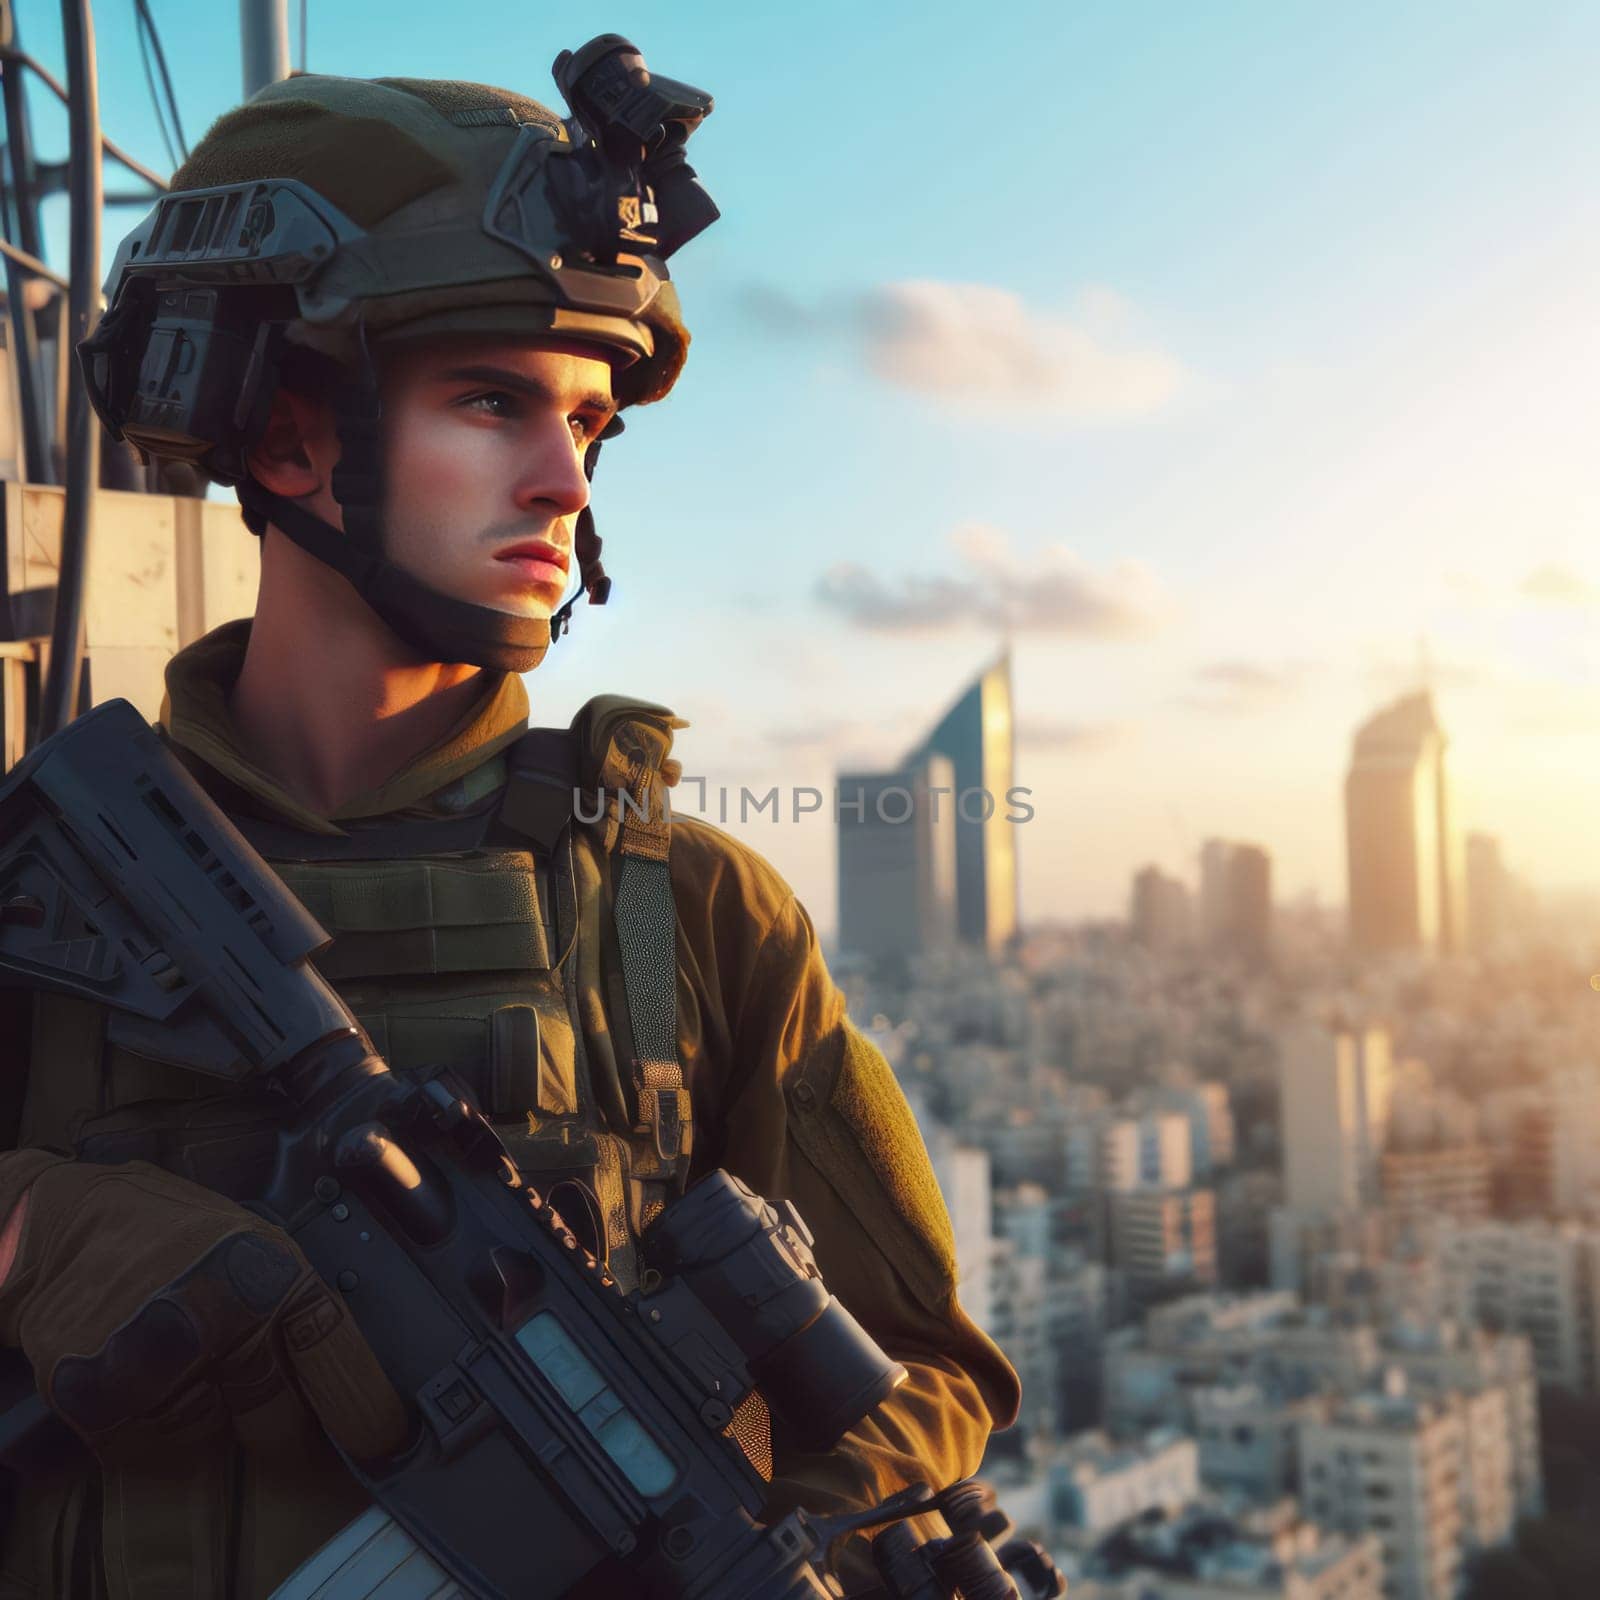 Israeli soldier in full gear with a blurred city skyline in the background. by sfinks